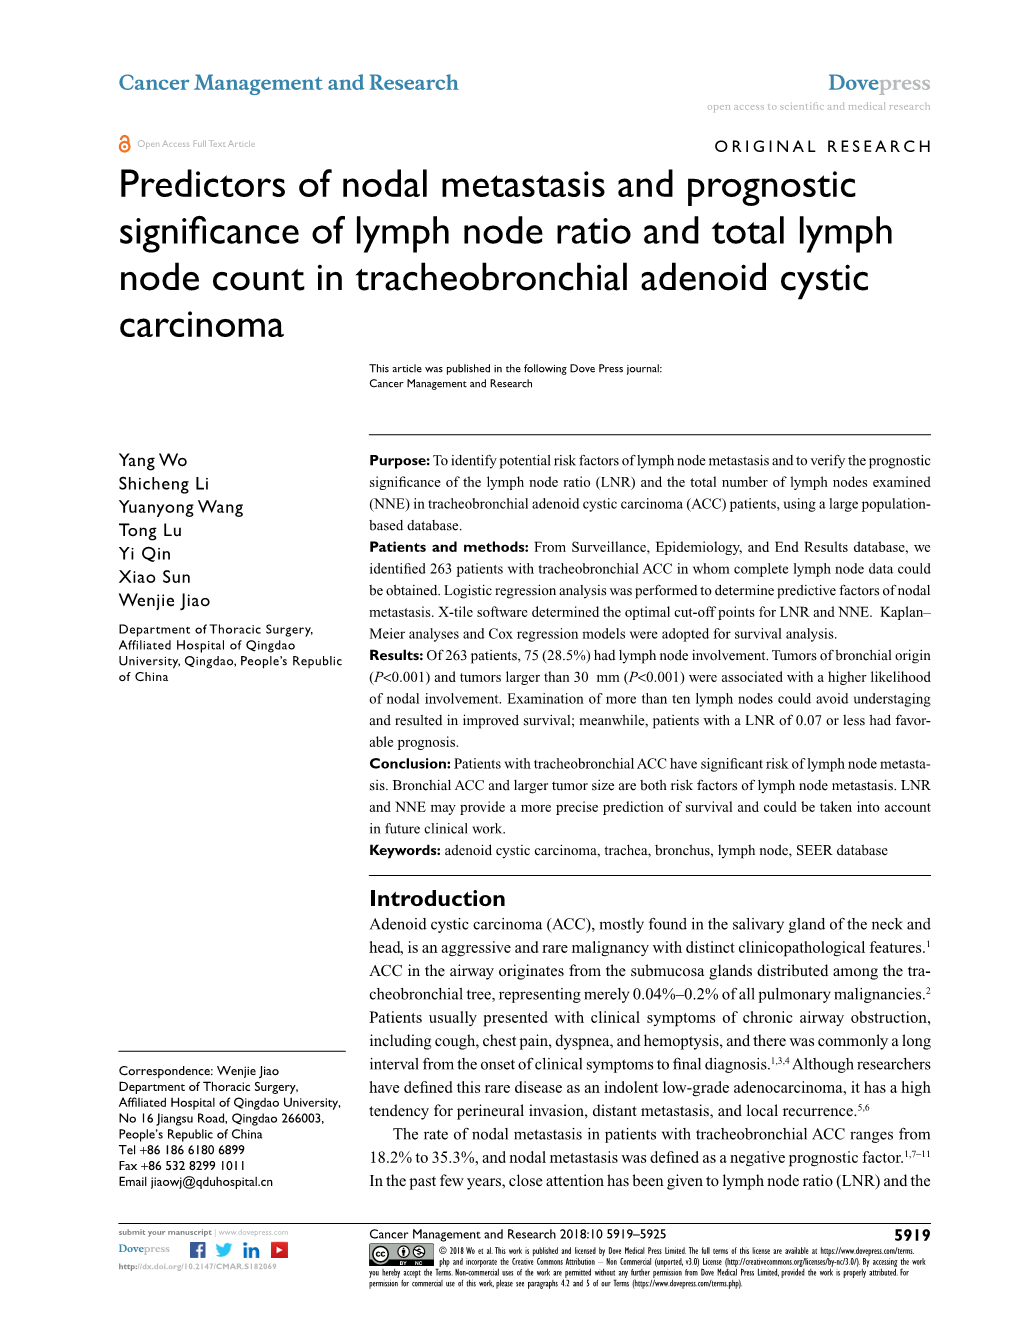 Predictors of Nodal Metastasis and Prognostic Significance of Lymph Node Ratio and Total Lymph Node Count in Tracheobronchial Adenoid Cystic Carcinoma